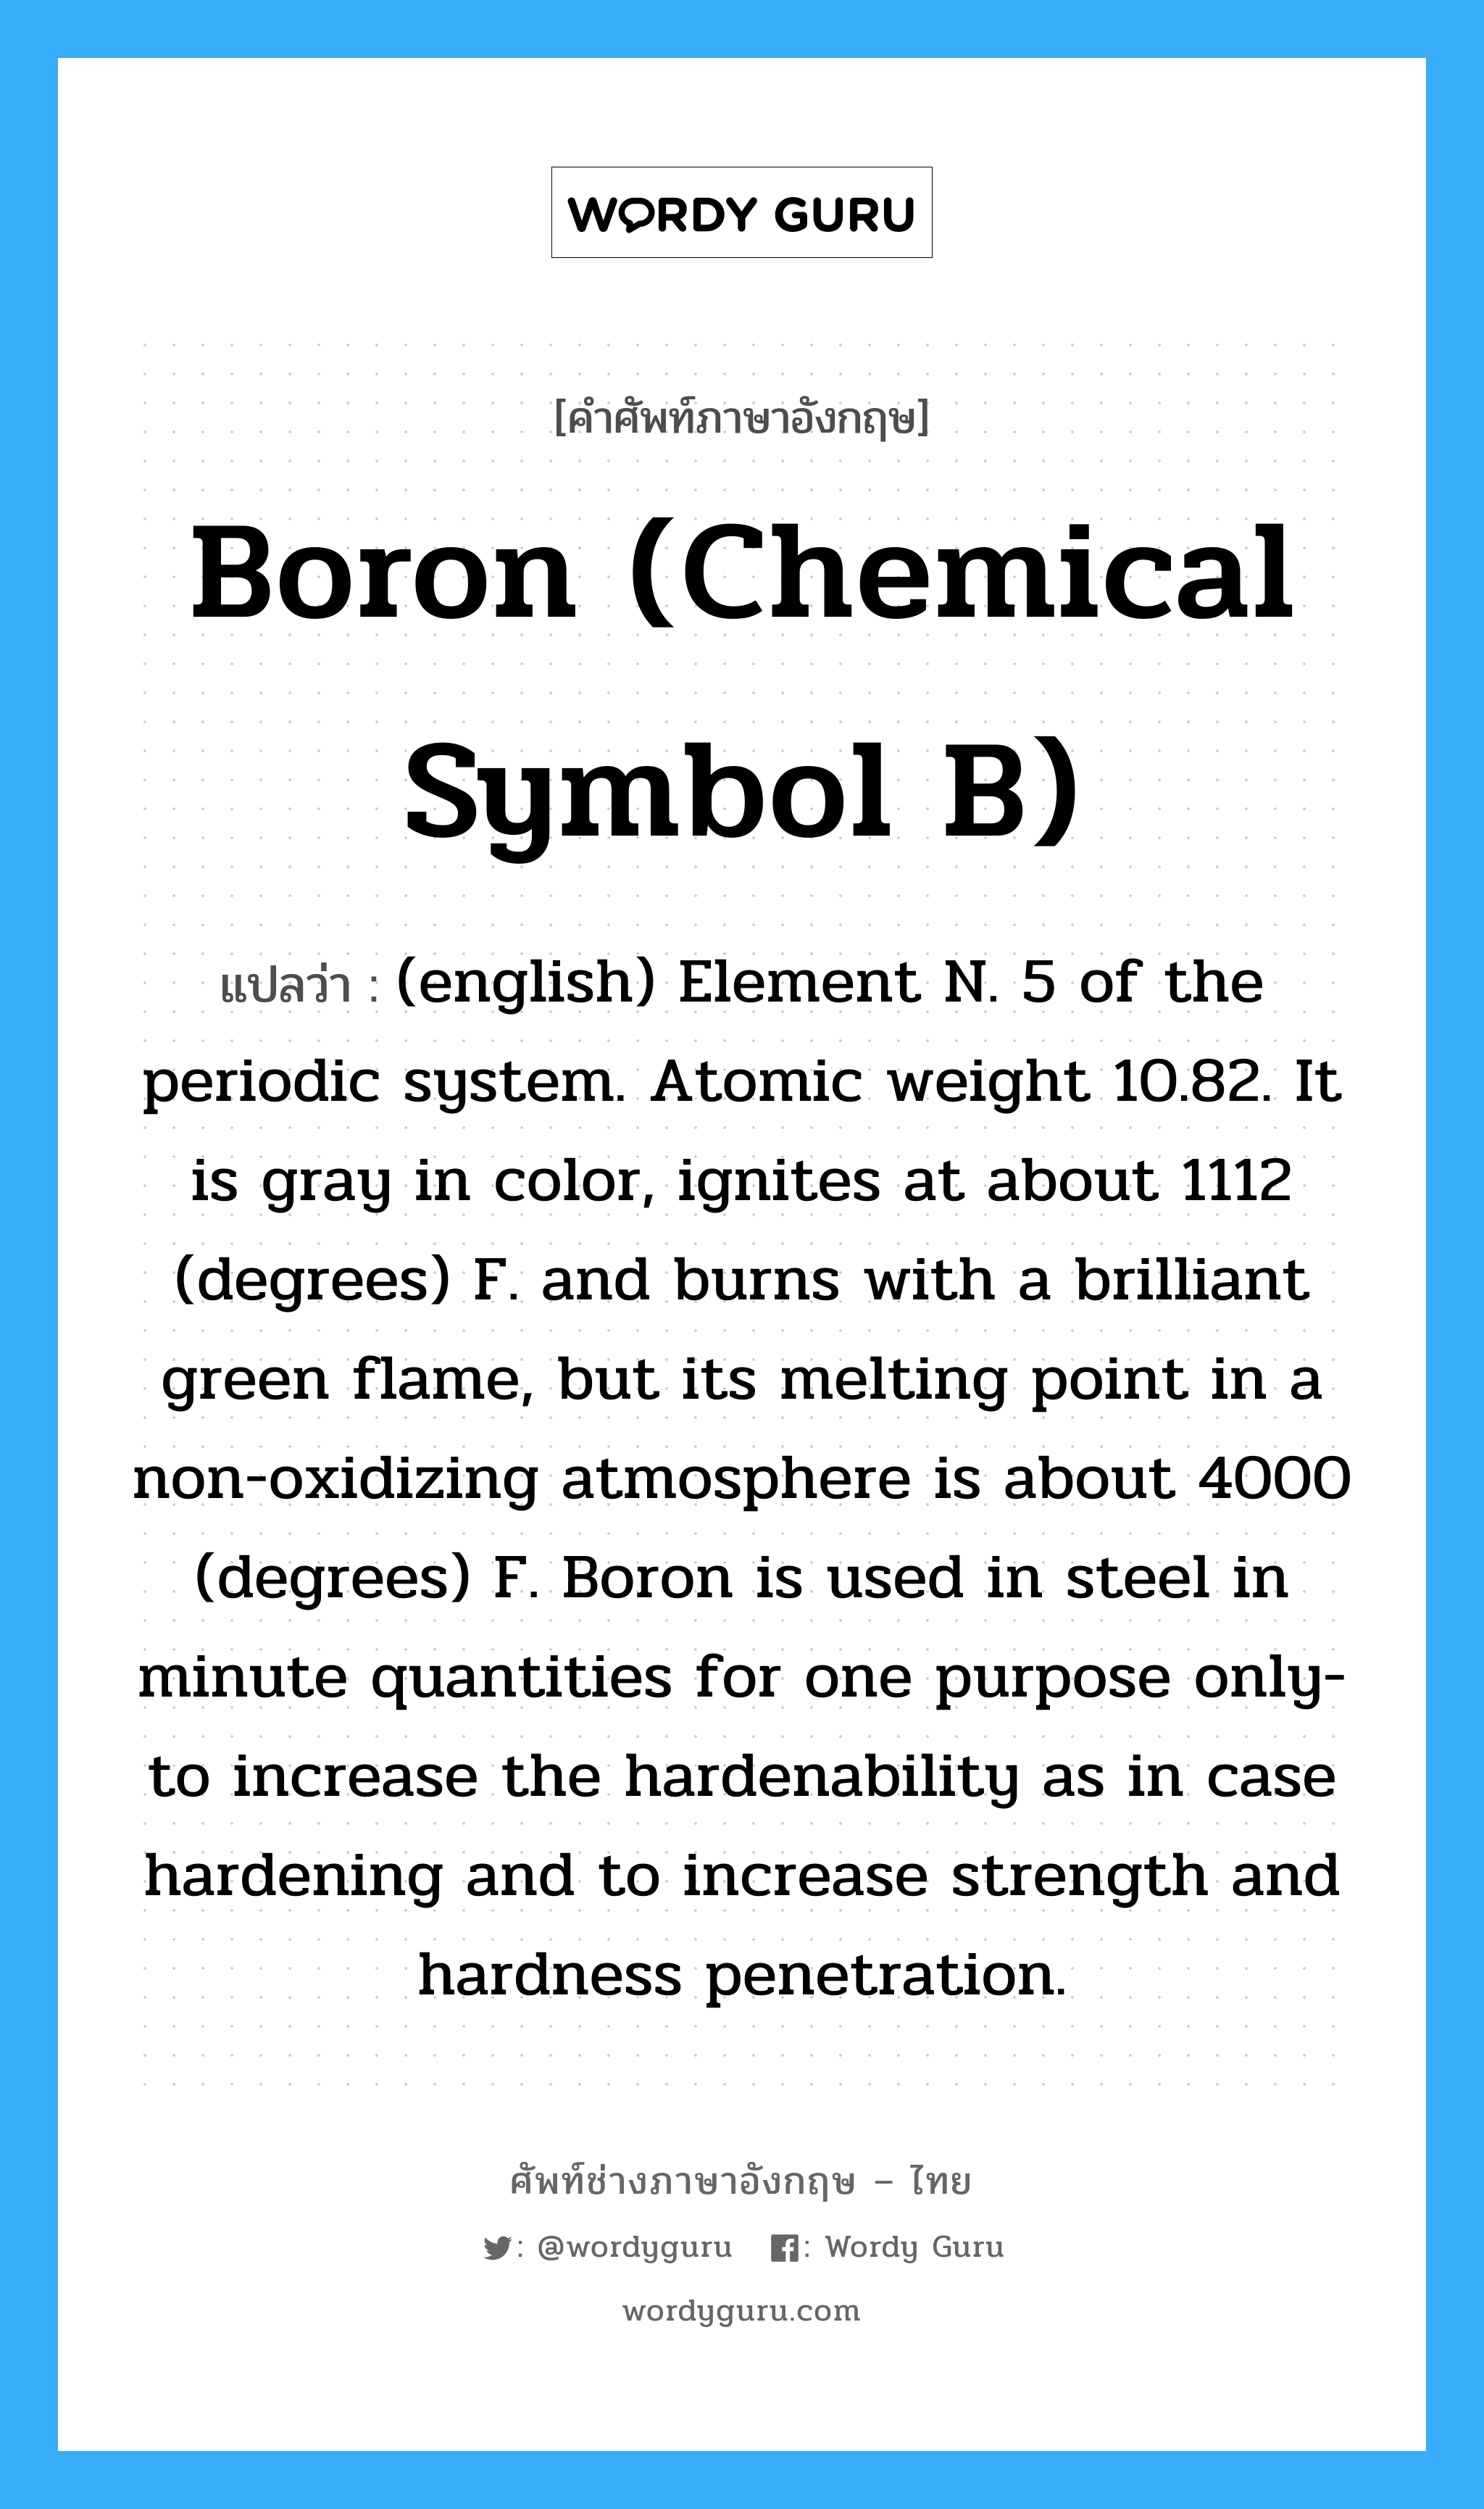 Boron (chemical symbol B) แปลว่า?, คำศัพท์ช่างภาษาอังกฤษ - ไทย Boron (chemical symbol B) คำศัพท์ภาษาอังกฤษ Boron (chemical symbol B) แปลว่า (english) Element N. 5 of the periodic system. Atomic weight 10.82. It is gray in color, ignites at about 1112 (degrees) F. and burns with a brilliant green flame, but its melting point in a non-oxidizing atmosphere is about 4000 (degrees) F. Boron is used in steel in minute quantities for one purpose only- to increase the hardenability as in case hardening and to increase strength and hardness penetration.